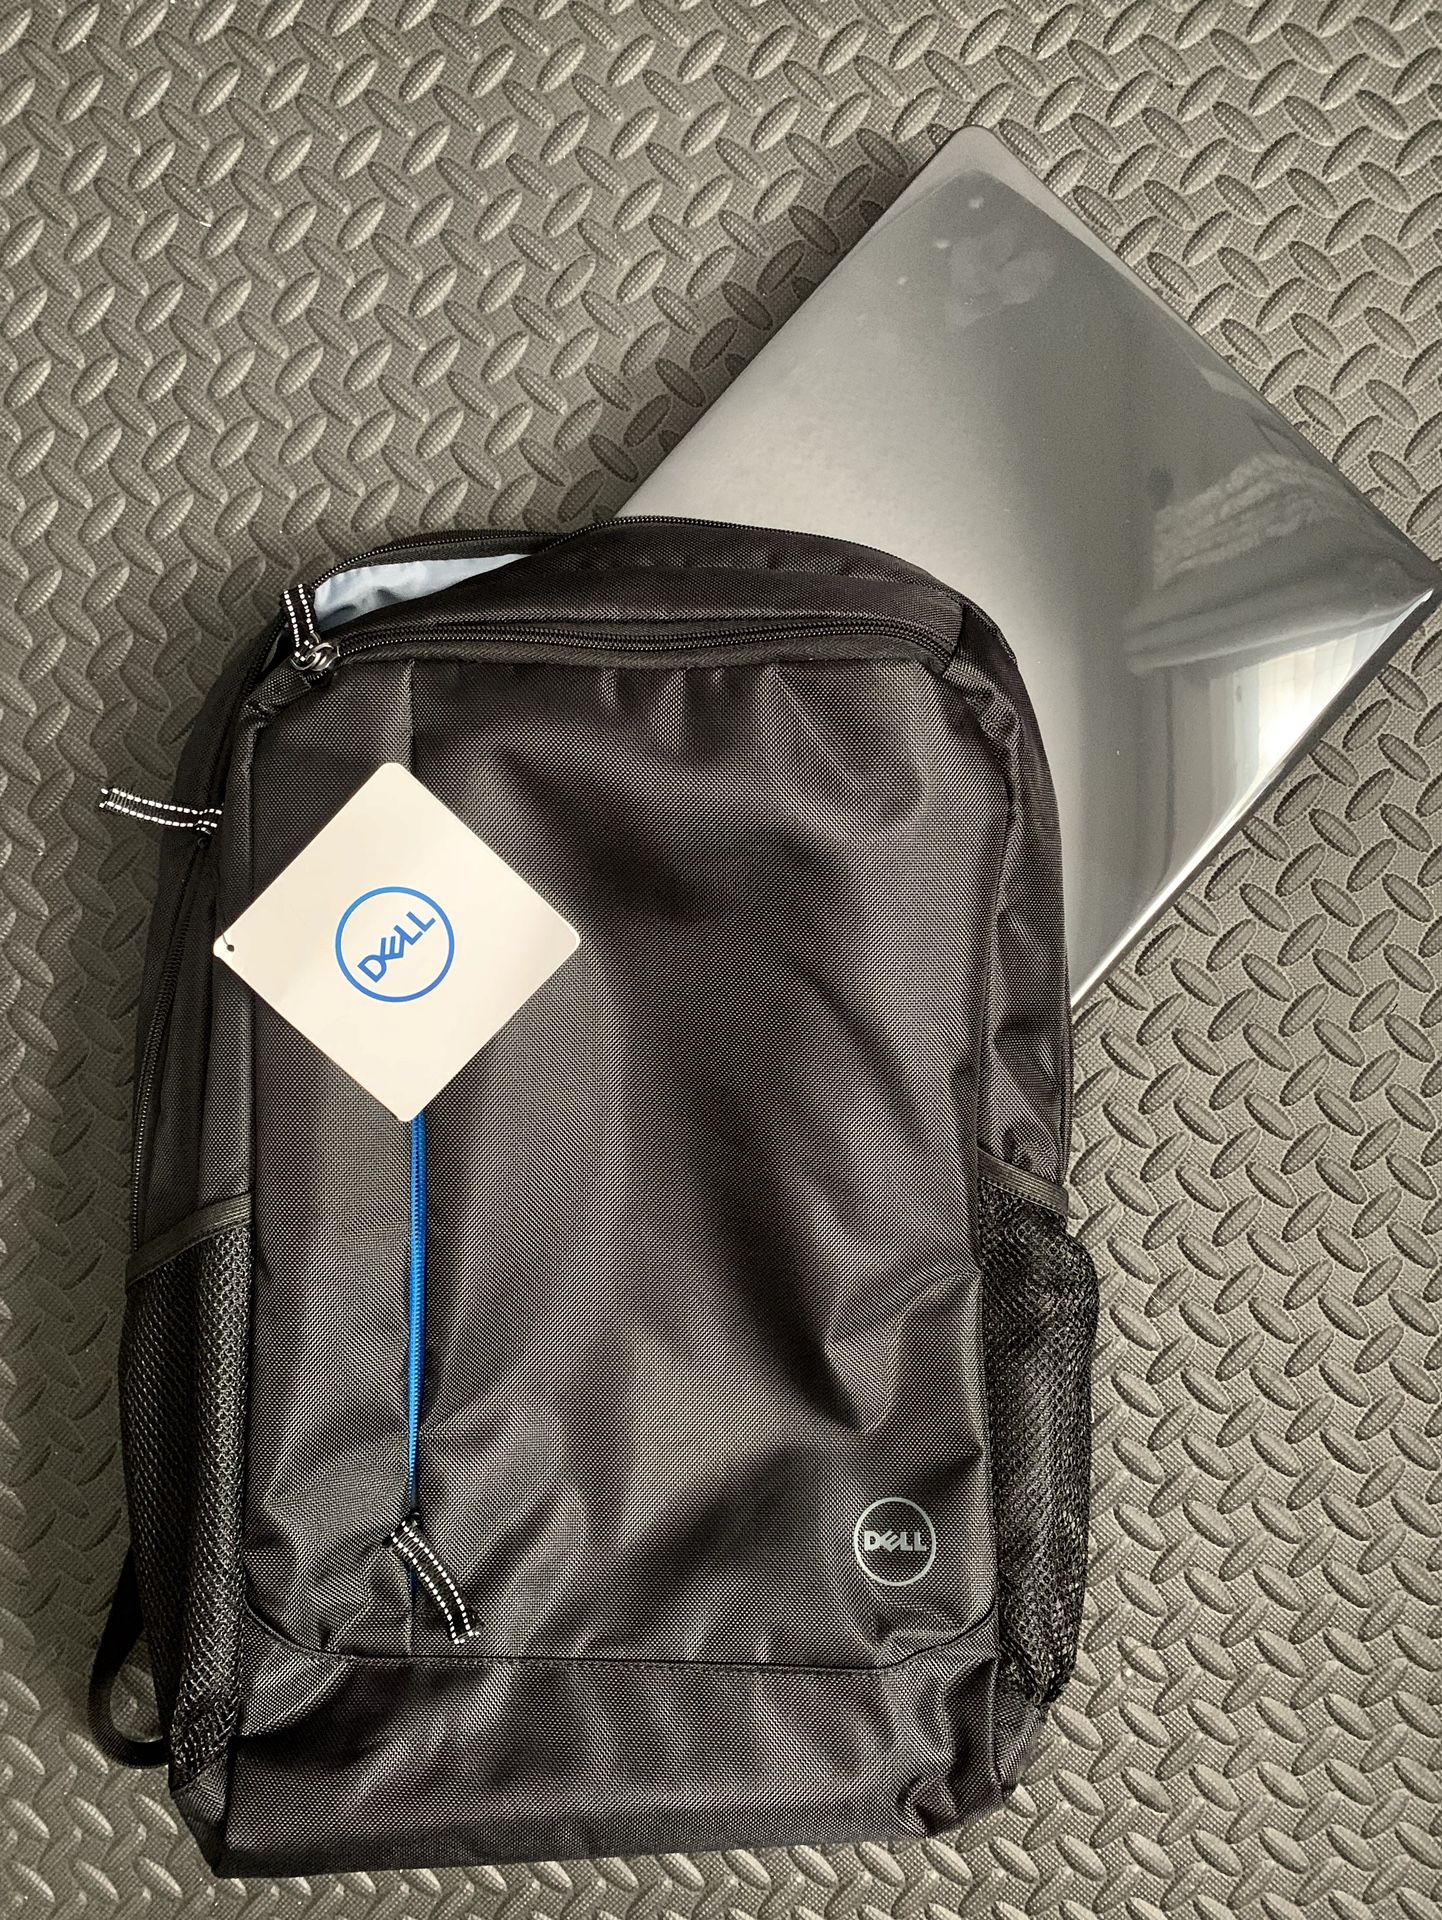 Brand New Never Used DEll Inspiron 15 3000 Laptop Computer with Dell backpack and Dell mouse.